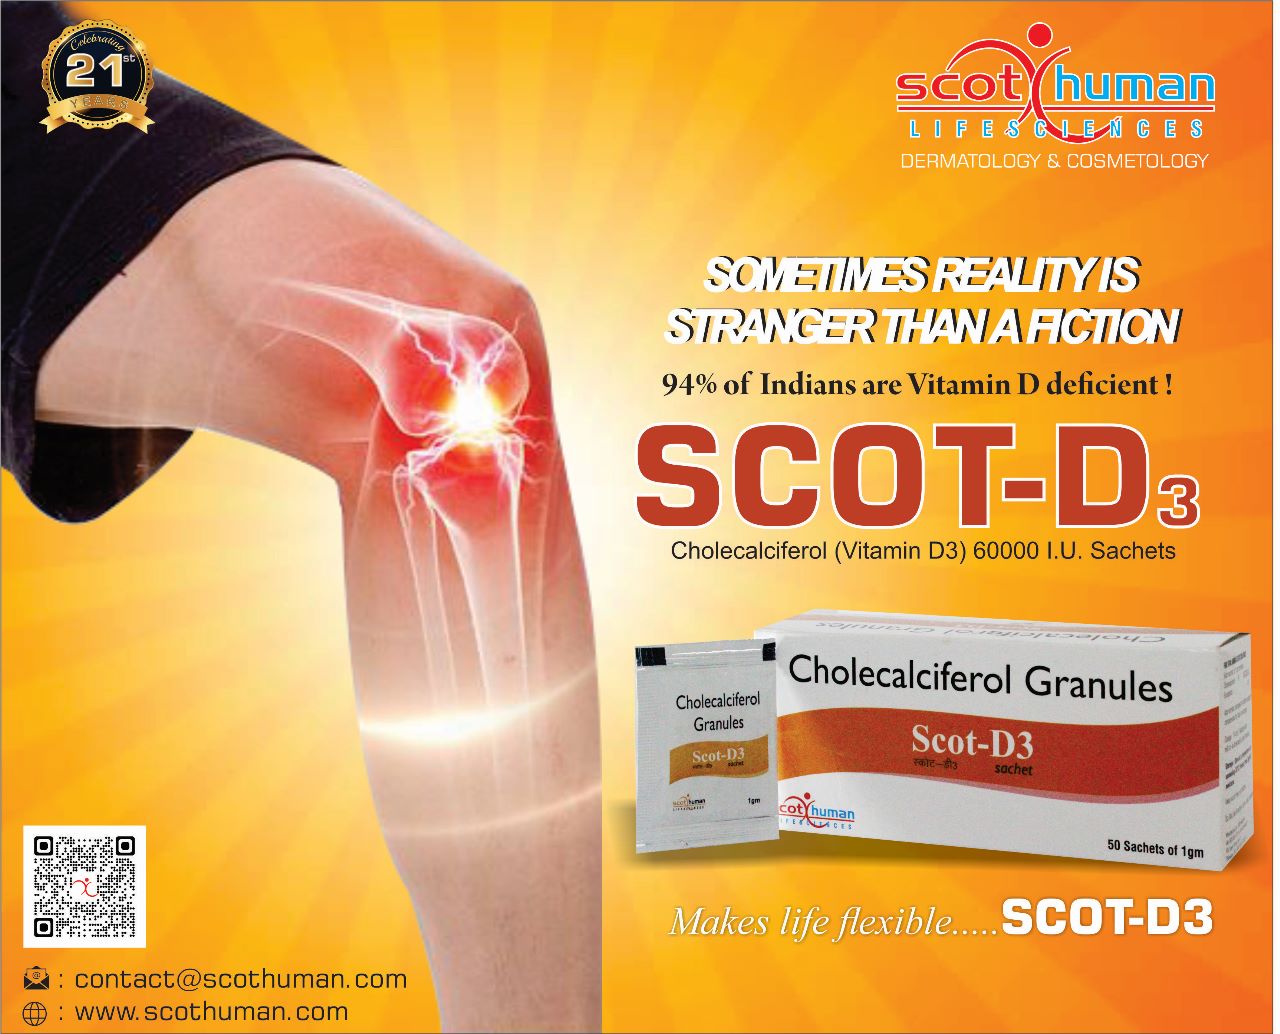 Product Name: Scot D3, Compositions of Scot D3 are Cholecalciferol Granules - Pharma Drugs and Chemicals